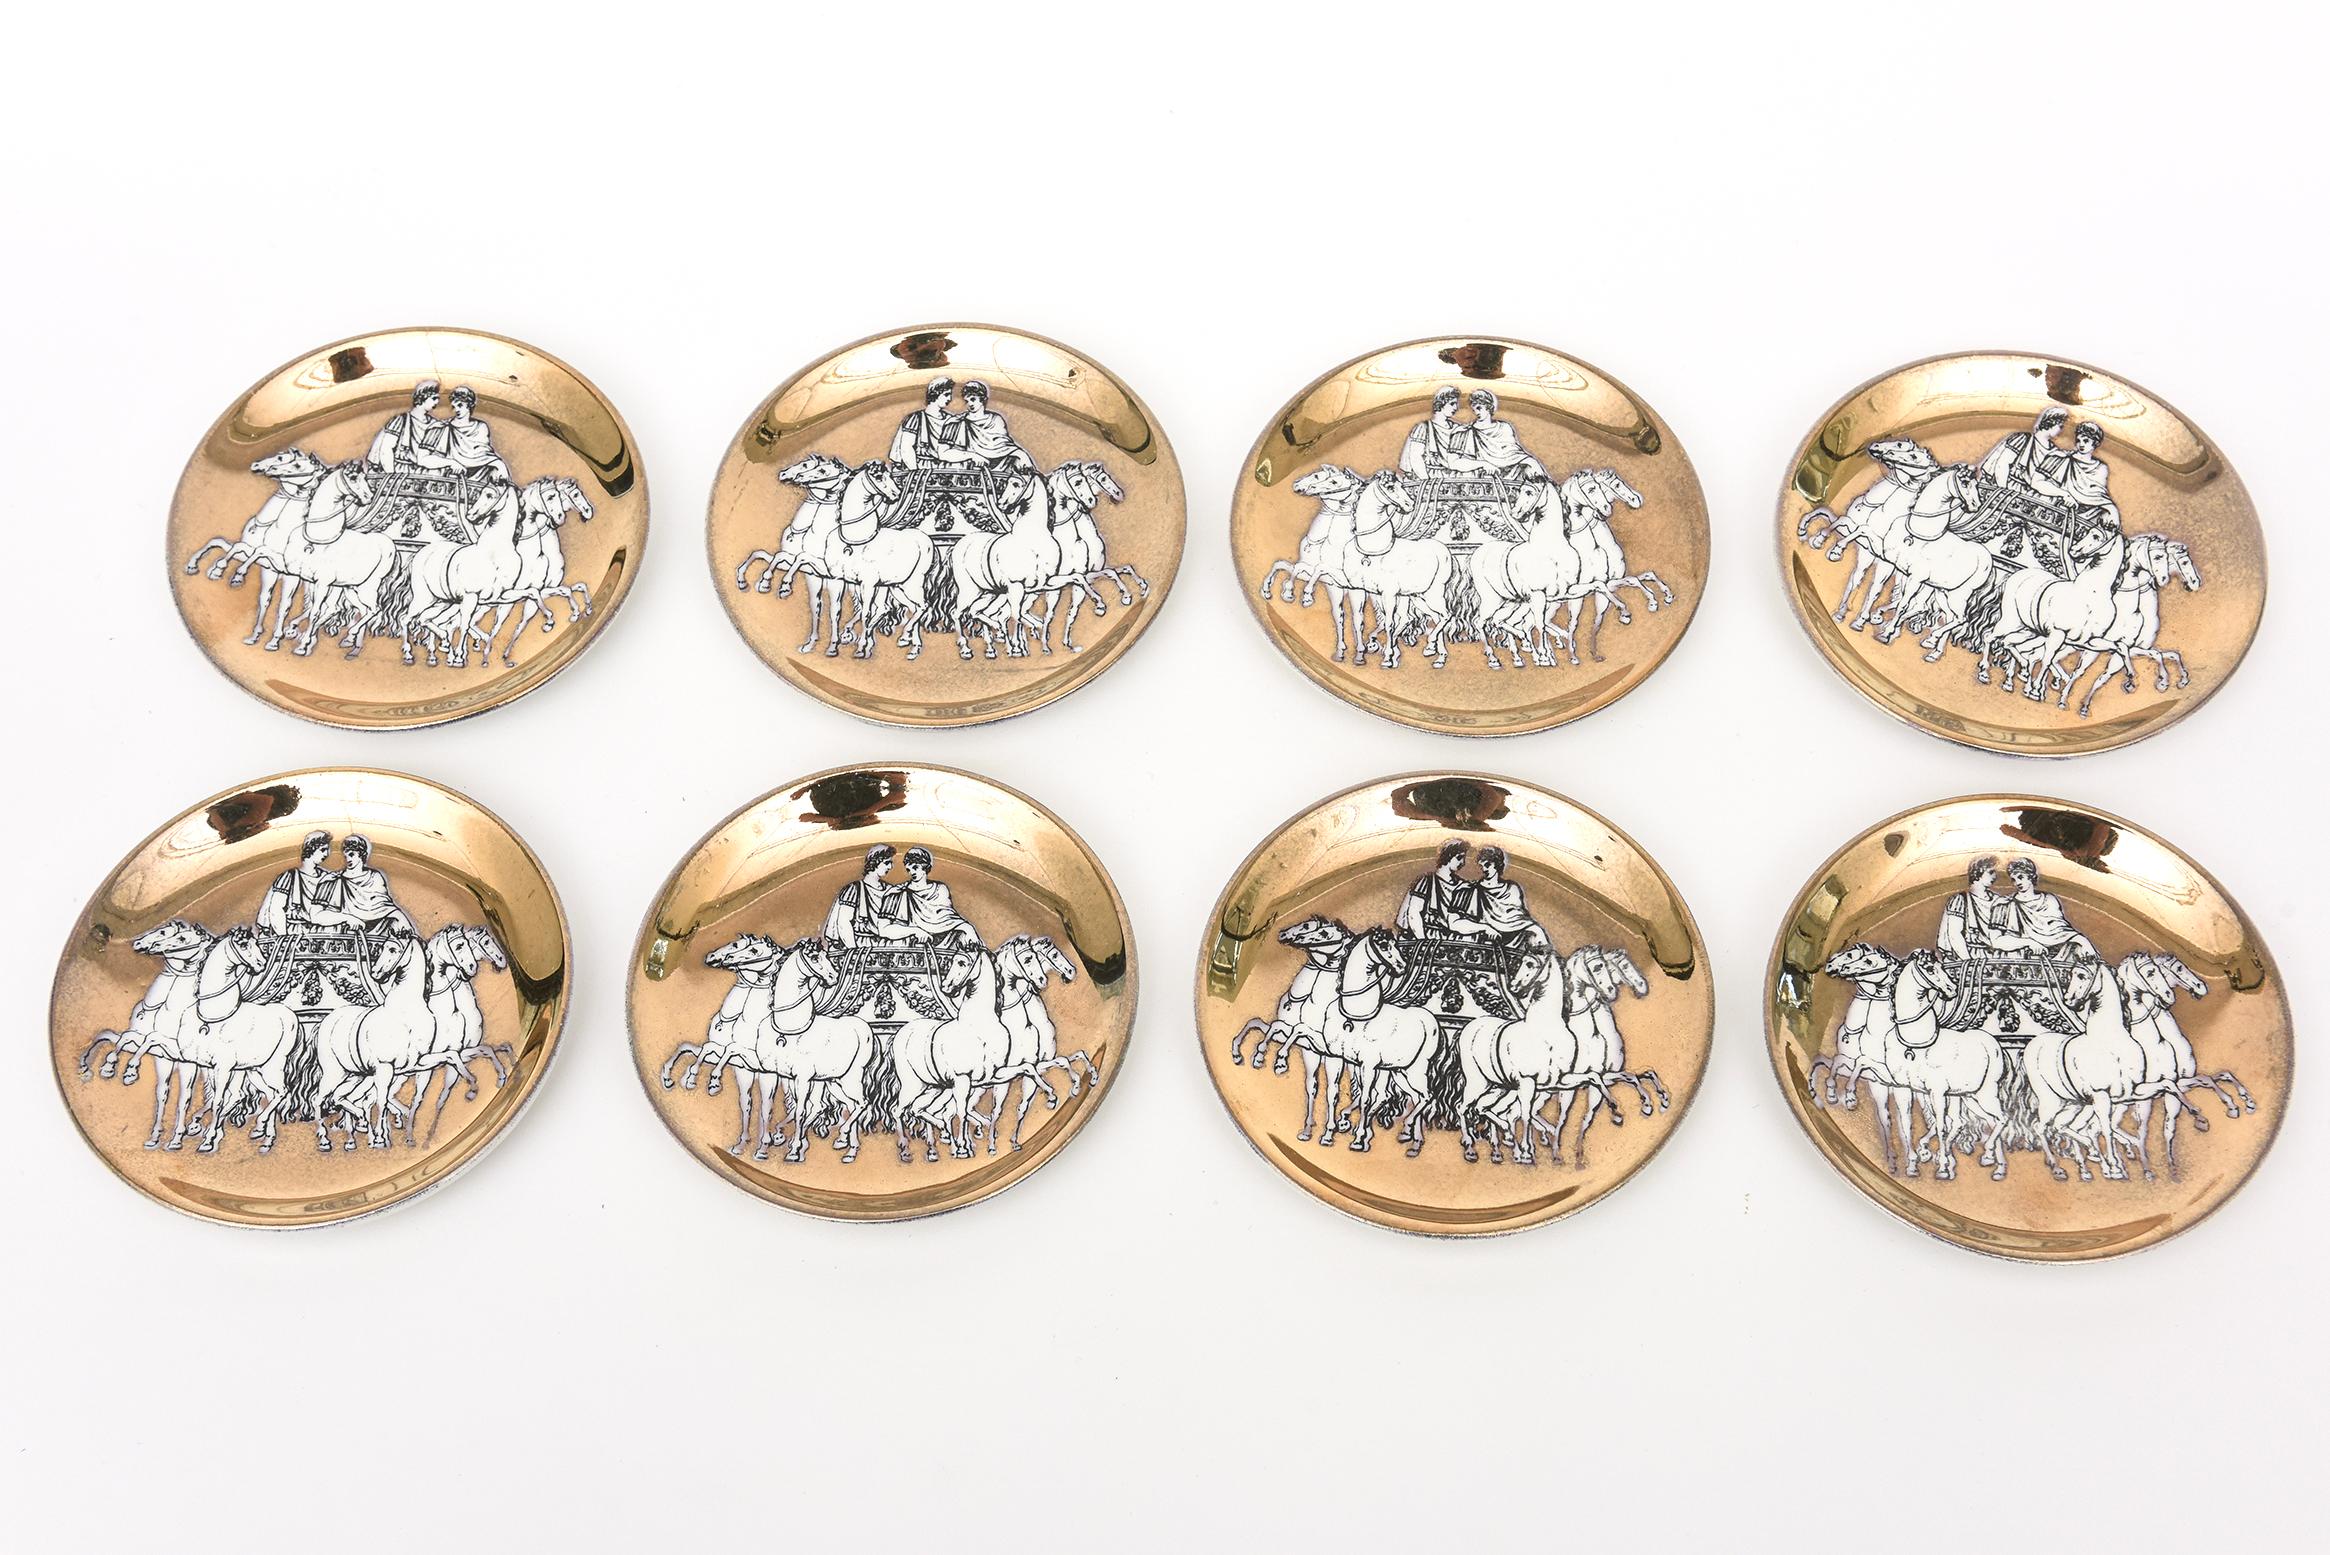 Vintage PIero Fornasetti Chariot Porcelain Gilded Coasters Barware Set of 8 For Sale 5